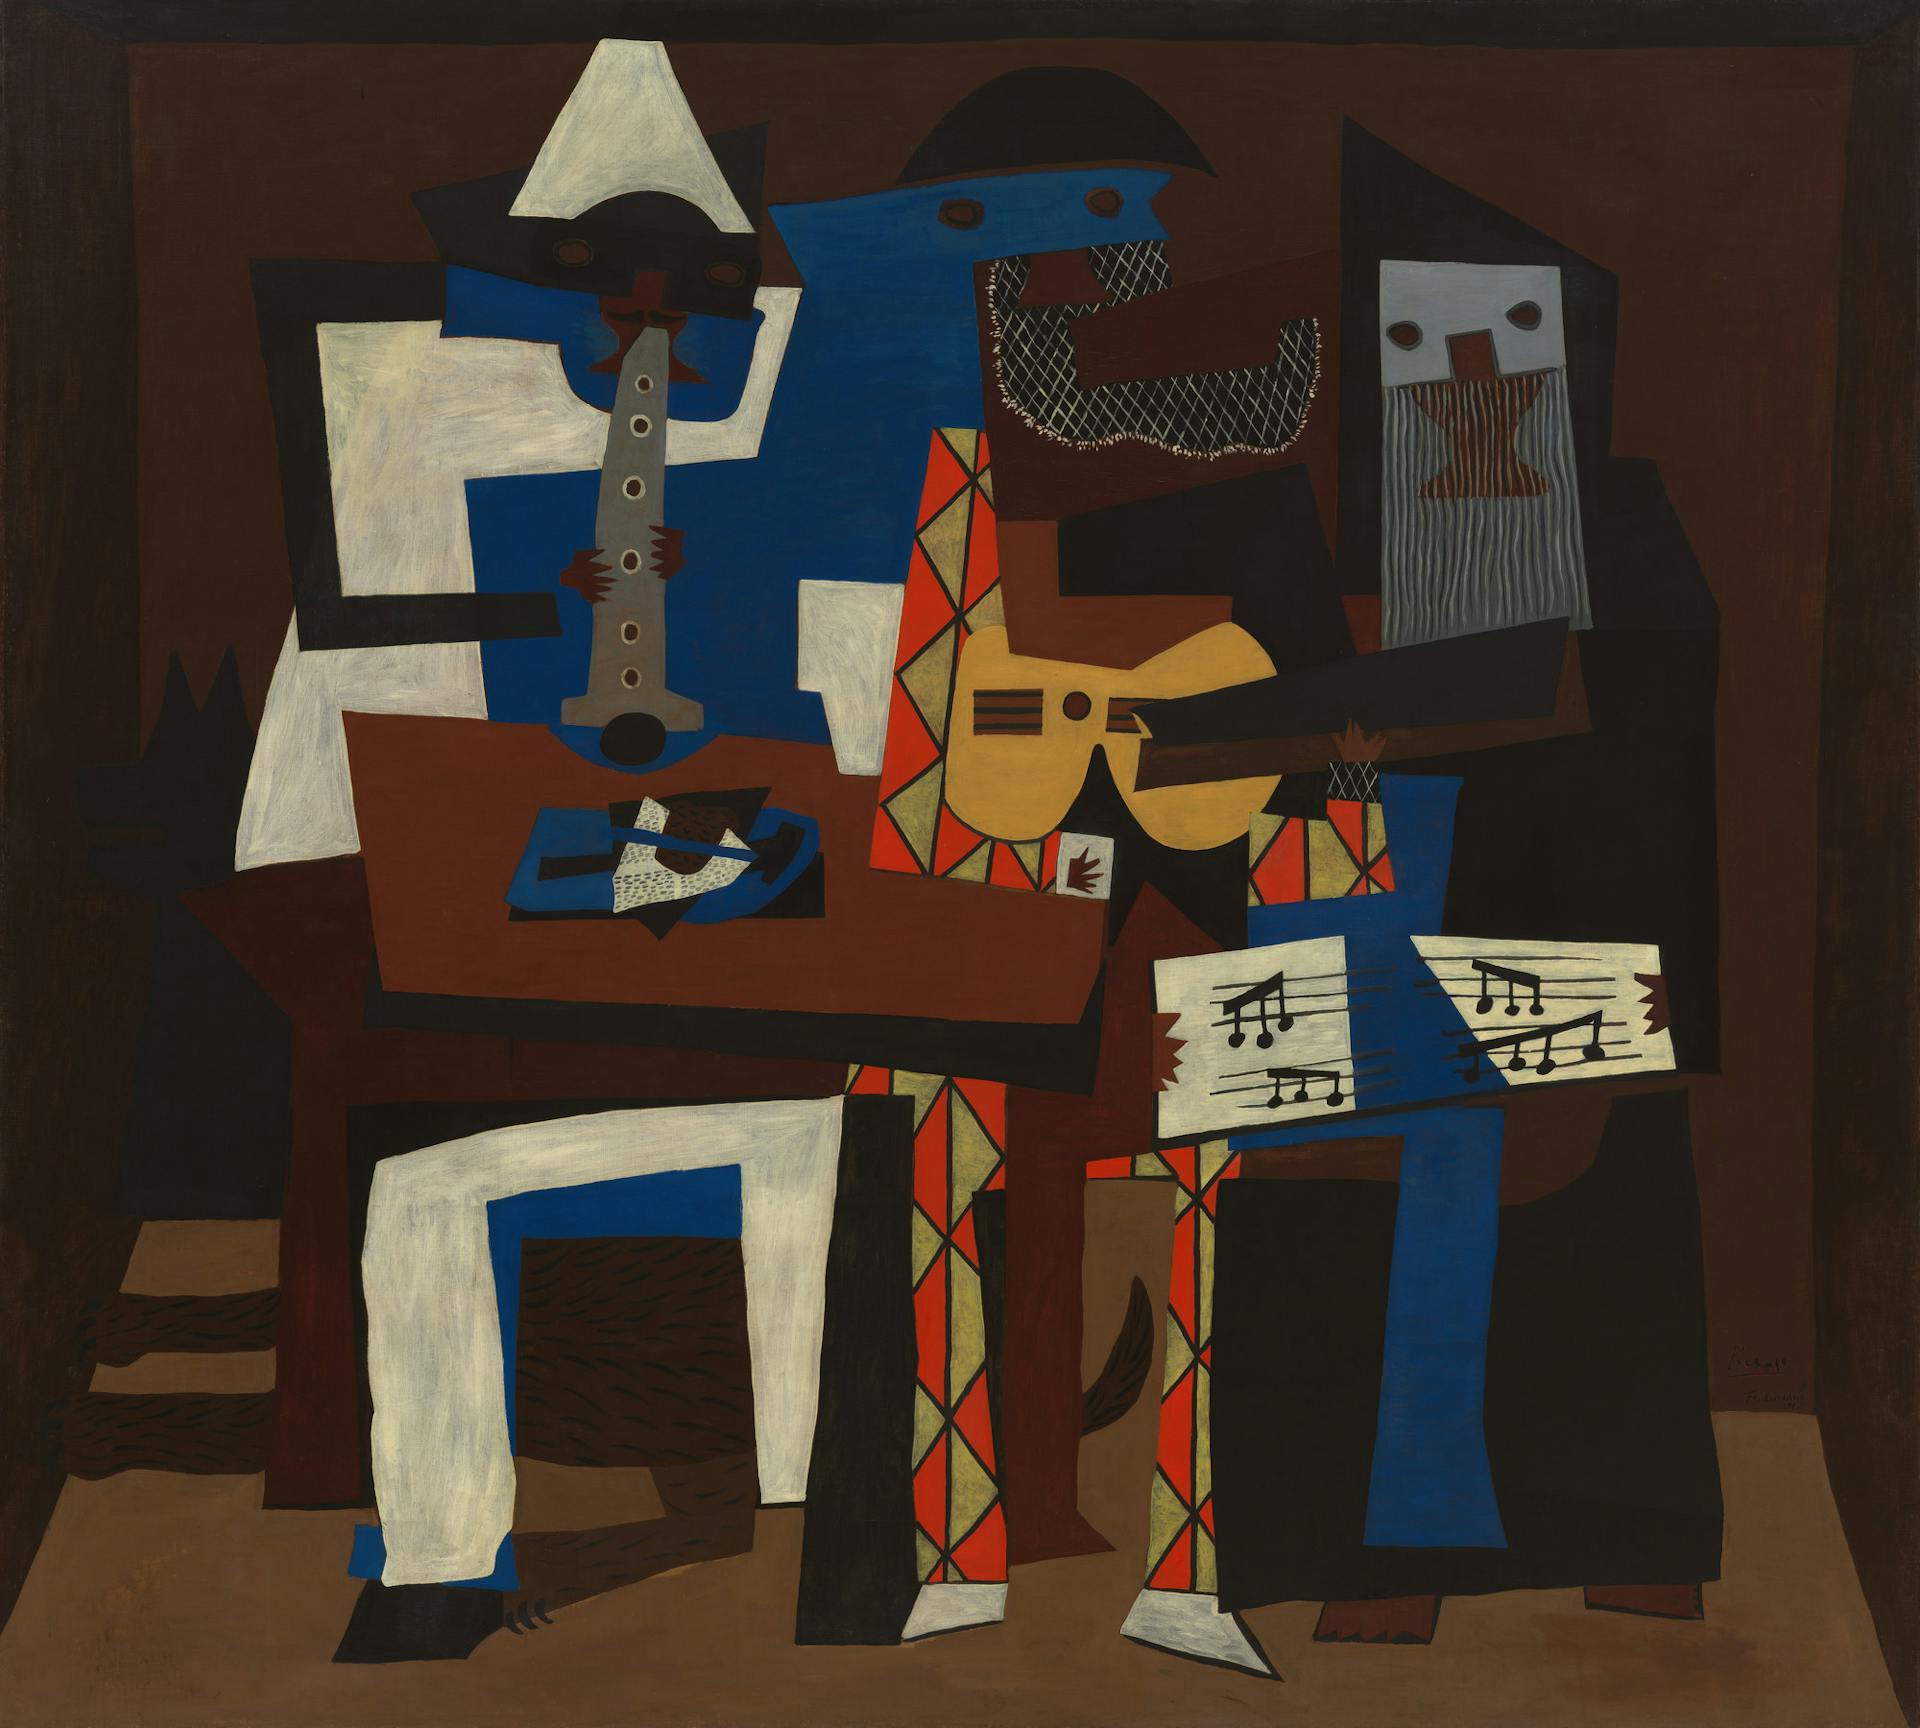 Three Musicians, 1921 by Pablo Picasso